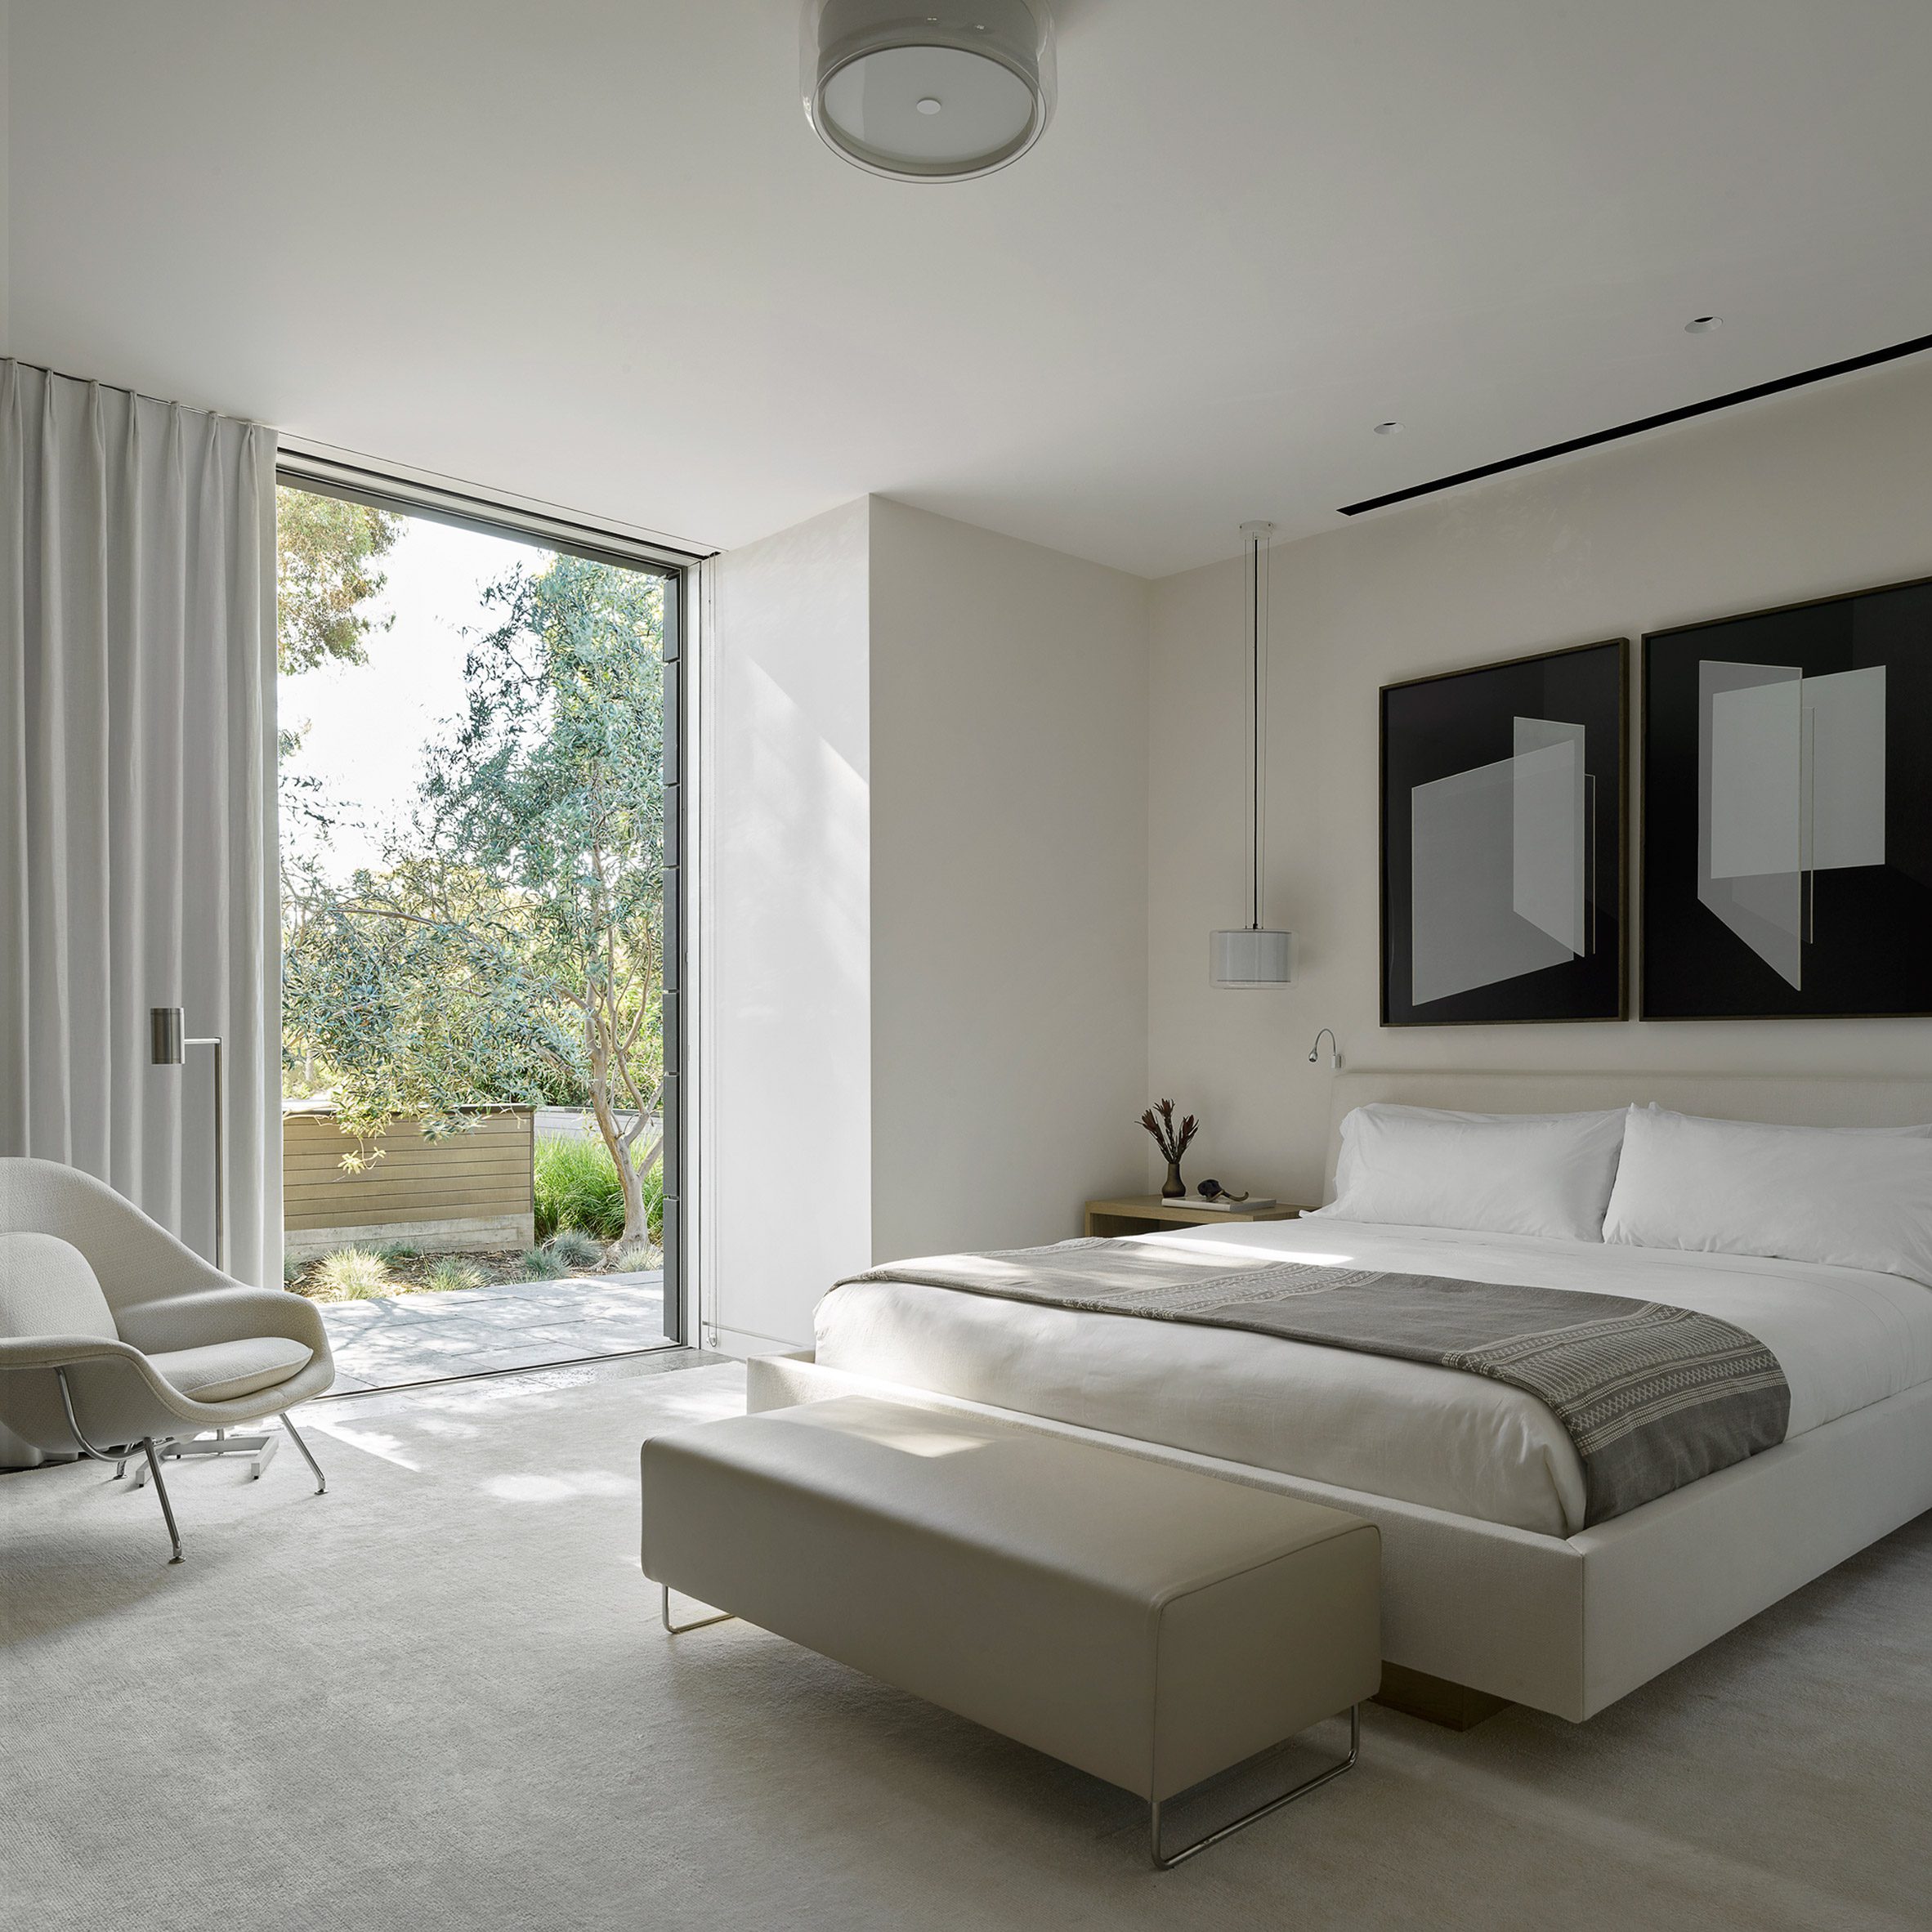 Minimalist bedroom at house by Walker Warner Architects